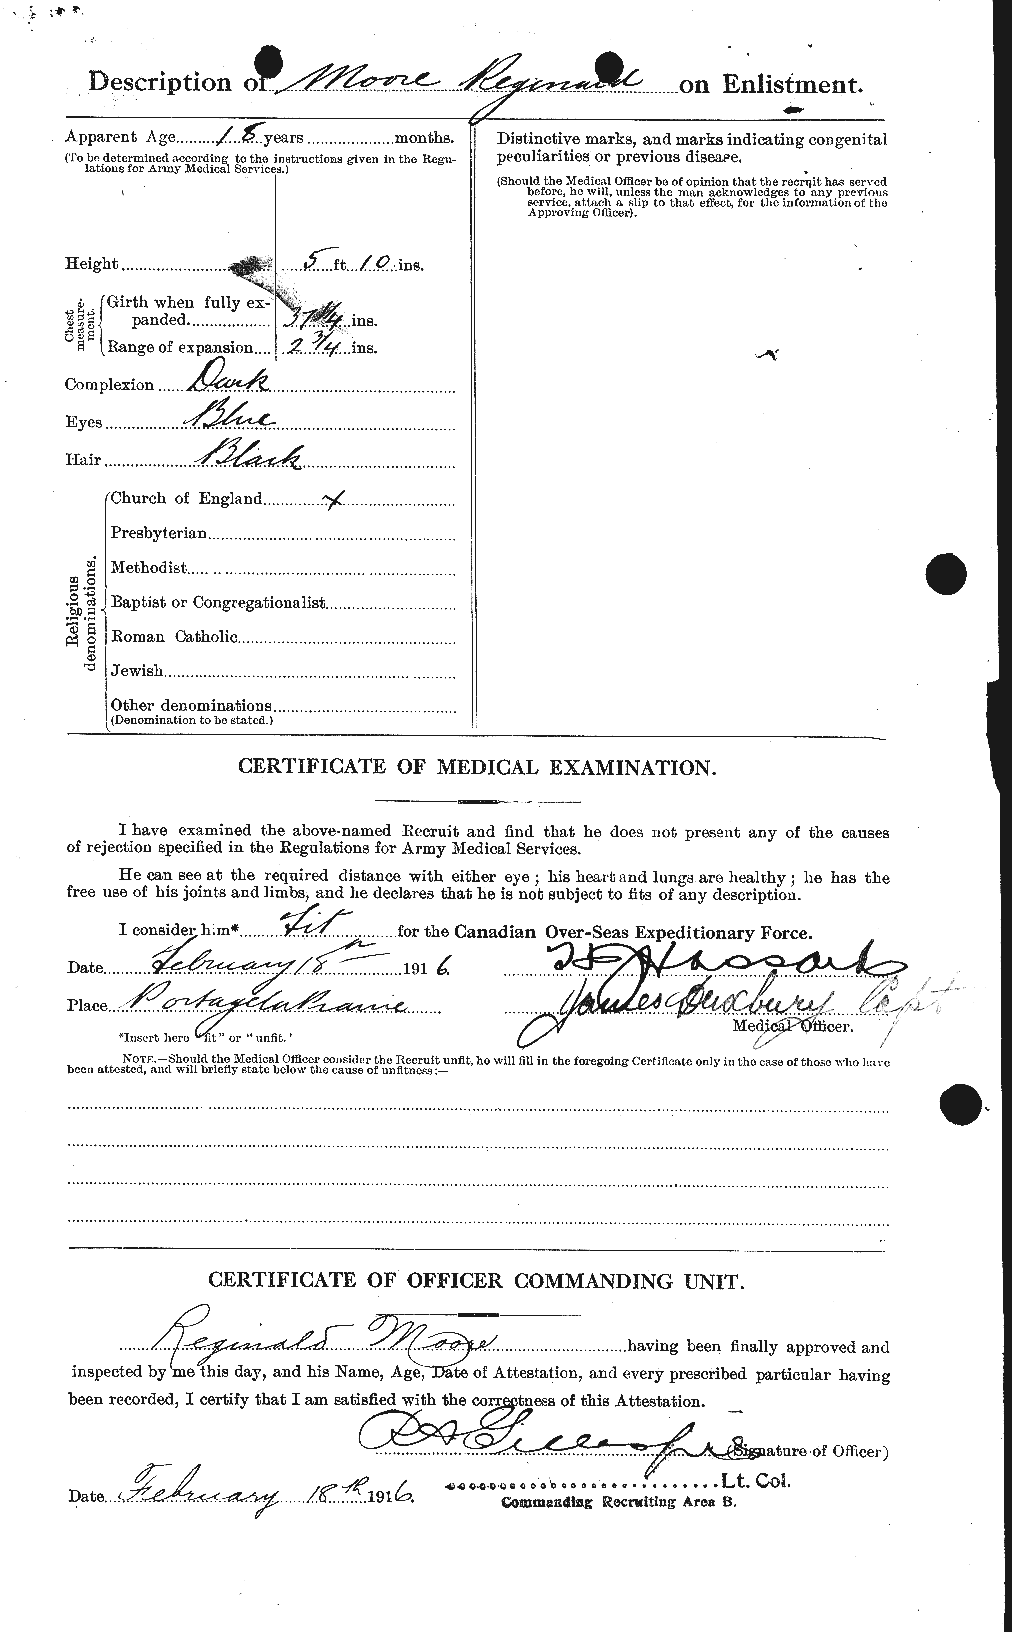 Personnel Records of the First World War - CEF 503522b